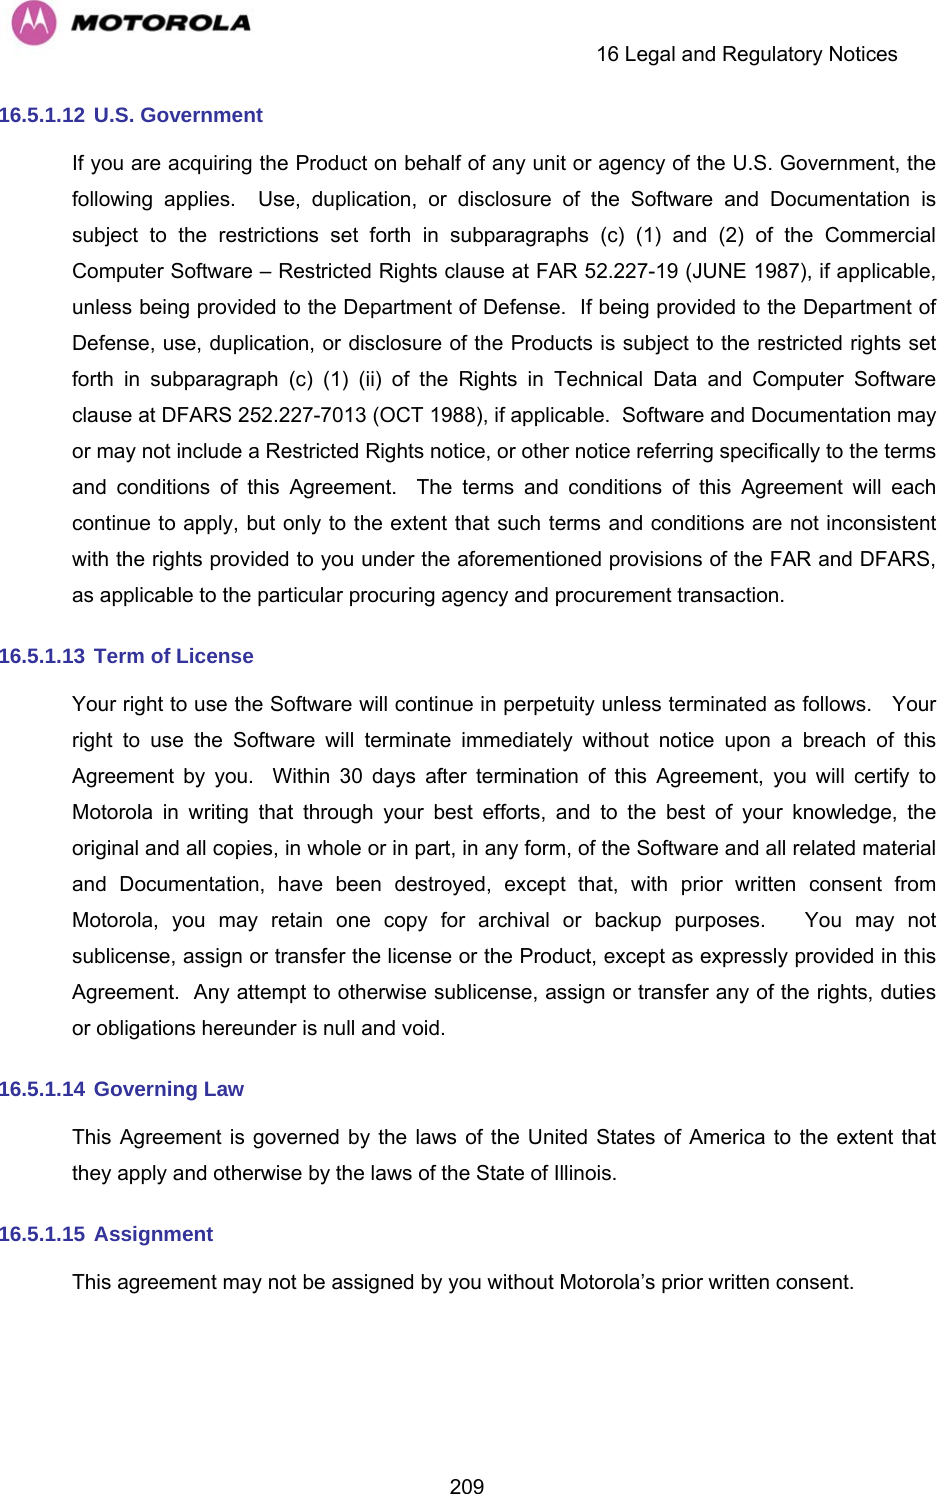     16 Legal and Regulatory Notices  20916.5.1.12  U.S. Government If you are acquiring the Product on behalf of any unit or agency of the U.S. Government, the following applies.  Use, duplication, or disclosure of the Software and Documentation is subject to the restrictions set forth in subparagraphs (c) (1) and (2) of the Commercial Computer Software – Restricted Rights clause at FAR 52.227-19 (JUNE 1987), if applicable, unless being provided to the Department of Defense.  If being provided to the Department of Defense, use, duplication, or disclosure of the Products is subject to the restricted rights set forth in subparagraph (c) (1) (ii) of the Rights in Technical Data and Computer Software clause at DFARS 252.227-7013 (OCT 1988), if applicable.  Software and Documentation may or may not include a Restricted Rights notice, or other notice referring specifically to the terms and conditions of this Agreement.  The terms and conditions of this Agreement will each continue to apply, but only to the extent that such terms and conditions are not inconsistent with the rights provided to you under the aforementioned provisions of the FAR and DFARS, as applicable to the particular procuring agency and procurement transaction. 16.5.1.13  Term of License Your right to use the Software will continue in perpetuity unless terminated as follows.   Your right to use the Software will terminate immediately without notice upon a breach of this Agreement by you.  Within 30 days after termination of this Agreement, you will certify to Motorola in writing that through your best efforts, and to the best of your knowledge, the original and all copies, in whole or in part, in any form, of the Software and all related material and Documentation, have been destroyed, except that, with prior written consent from Motorola, you may retain one copy for archival or backup purposes.   You may not sublicense, assign or transfer the license or the Product, except as expressly provided in this Agreement.  Any attempt to otherwise sublicense, assign or transfer any of the rights, duties or obligations hereunder is null and void. 16.5.1.14  Governing Law This Agreement is governed by the laws of the United States of America to the extent that they apply and otherwise by the laws of the State of Illinois. 16.5.1.15  Assignment This agreement may not be assigned by you without Motorola’s prior written consent. 